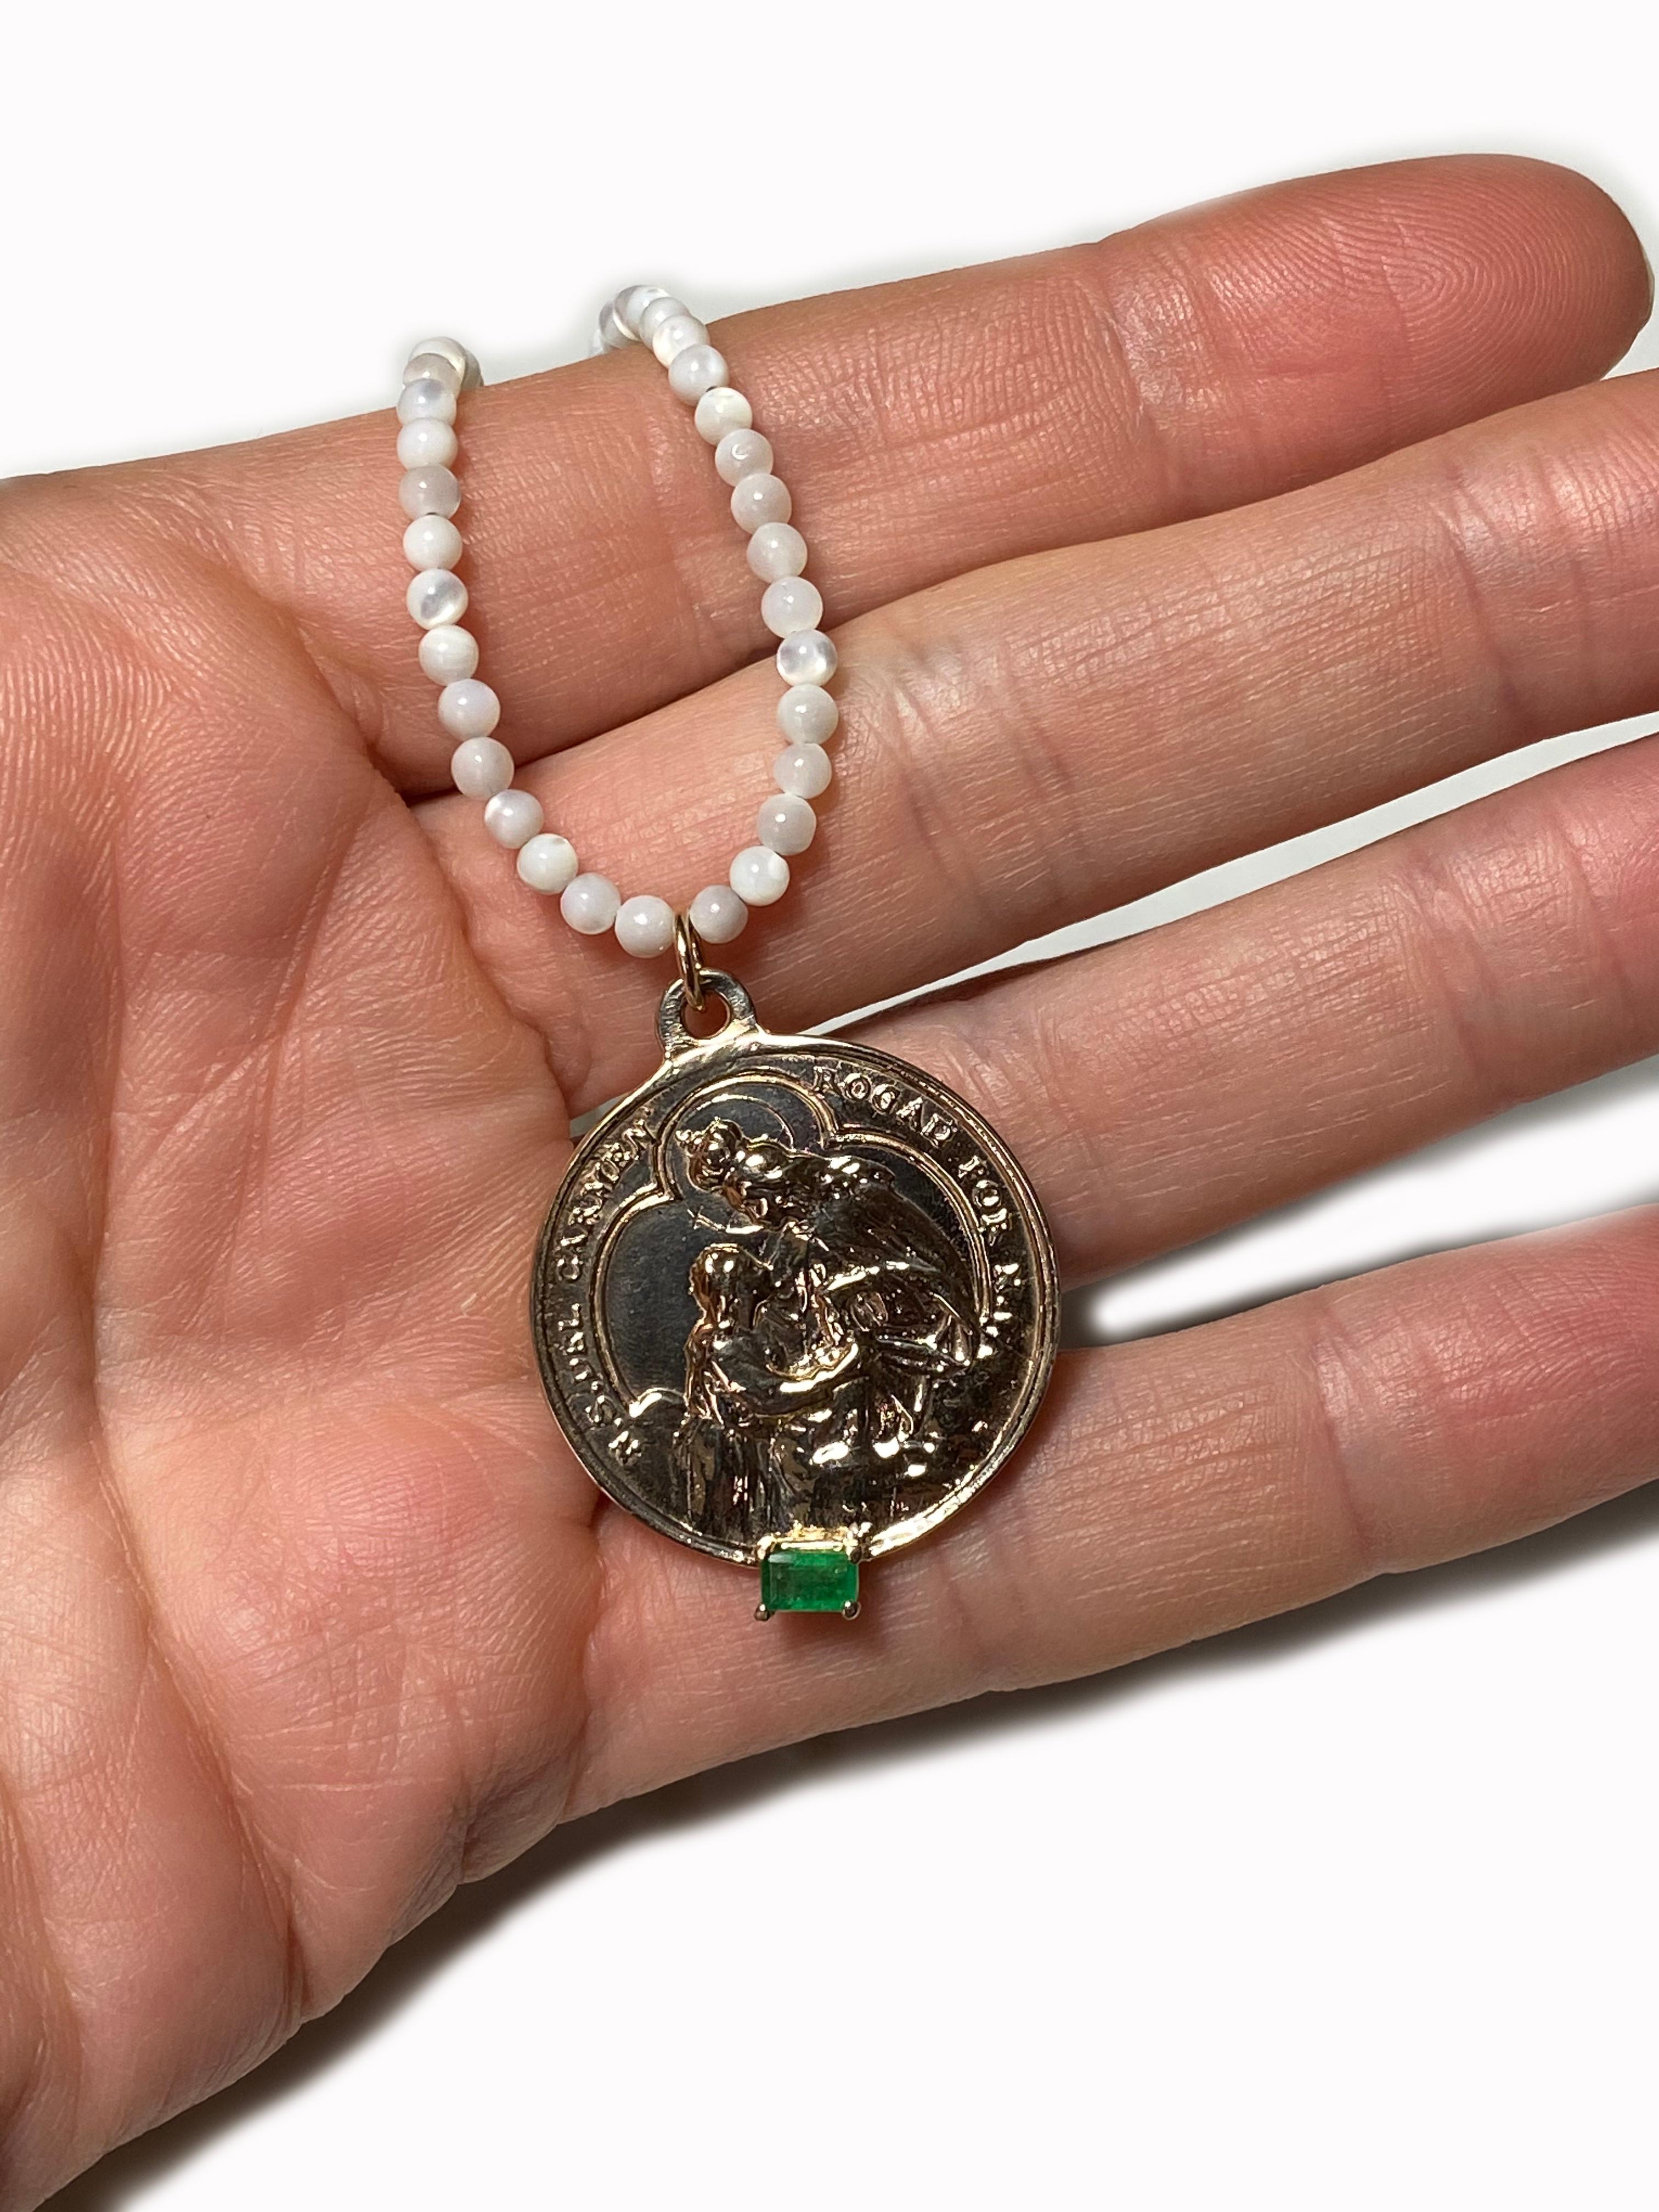 Emerald Virgin Mary Bronze White Bead Necklace J Dauphin

Exclusive piece with Virgin Mary pendant and an Emerald set in a gold prong on a bronze pendant. Bead Necklace is 18' long but can be made shorter or longer on request.

Symbols or medals can